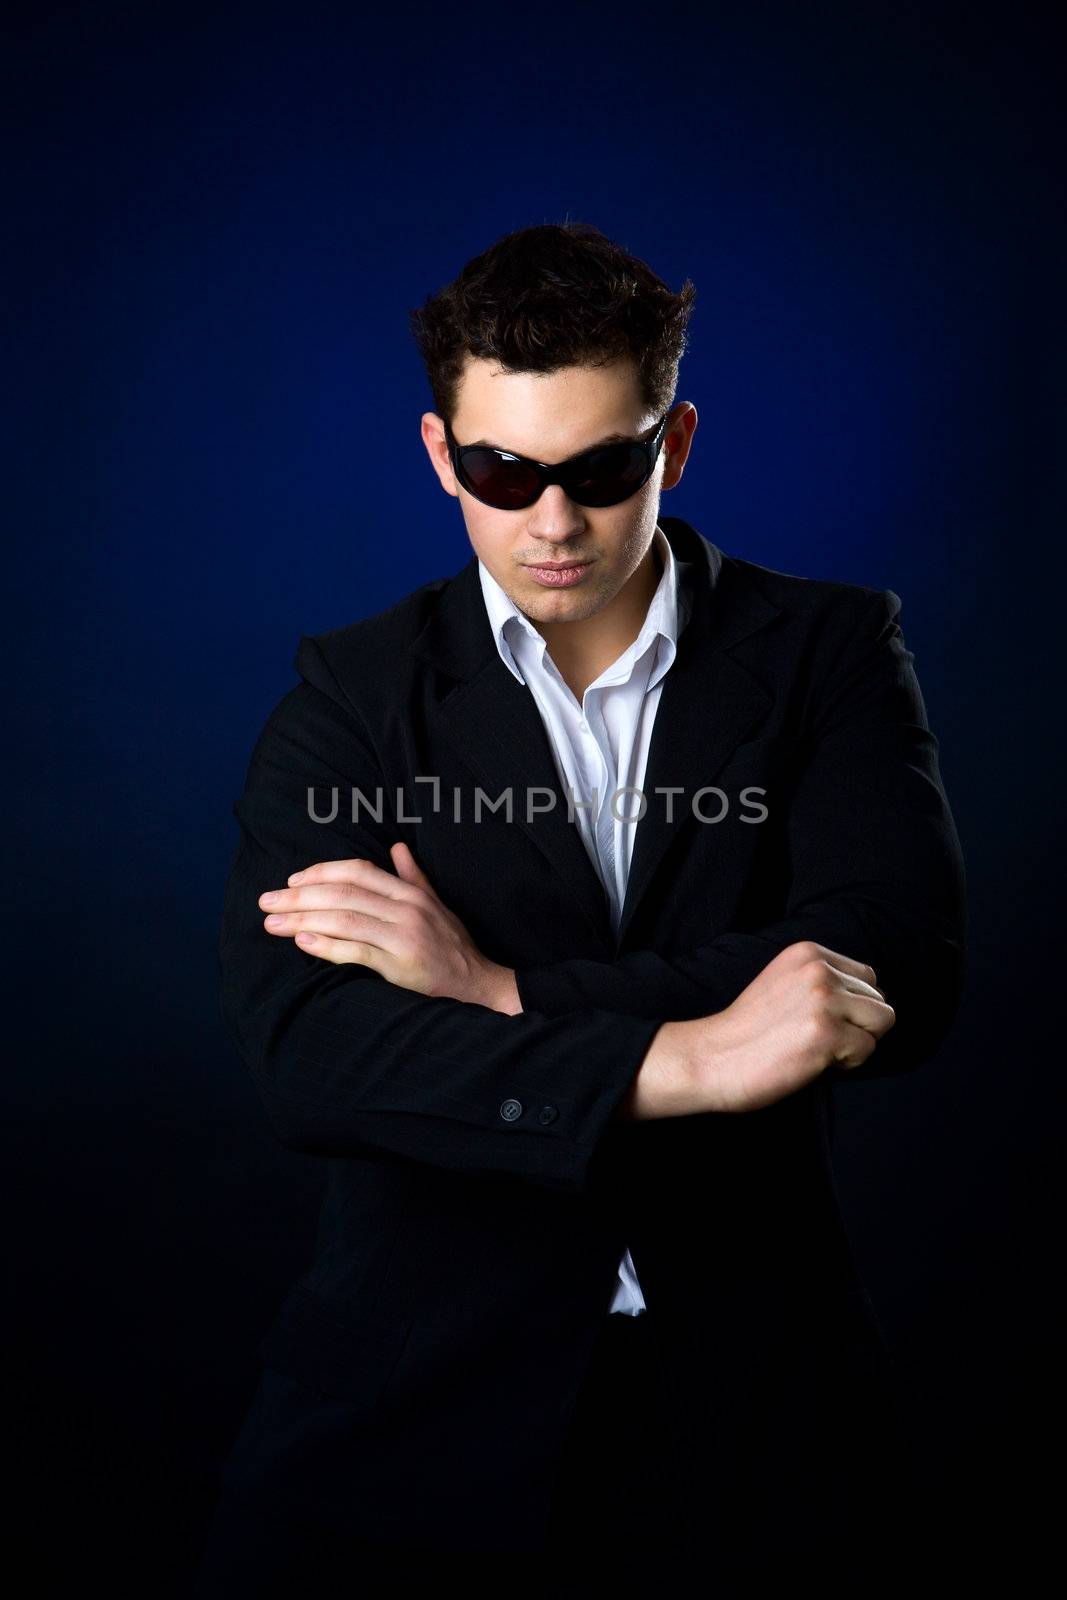 Young Man wearing suit and sunglasses over dark background